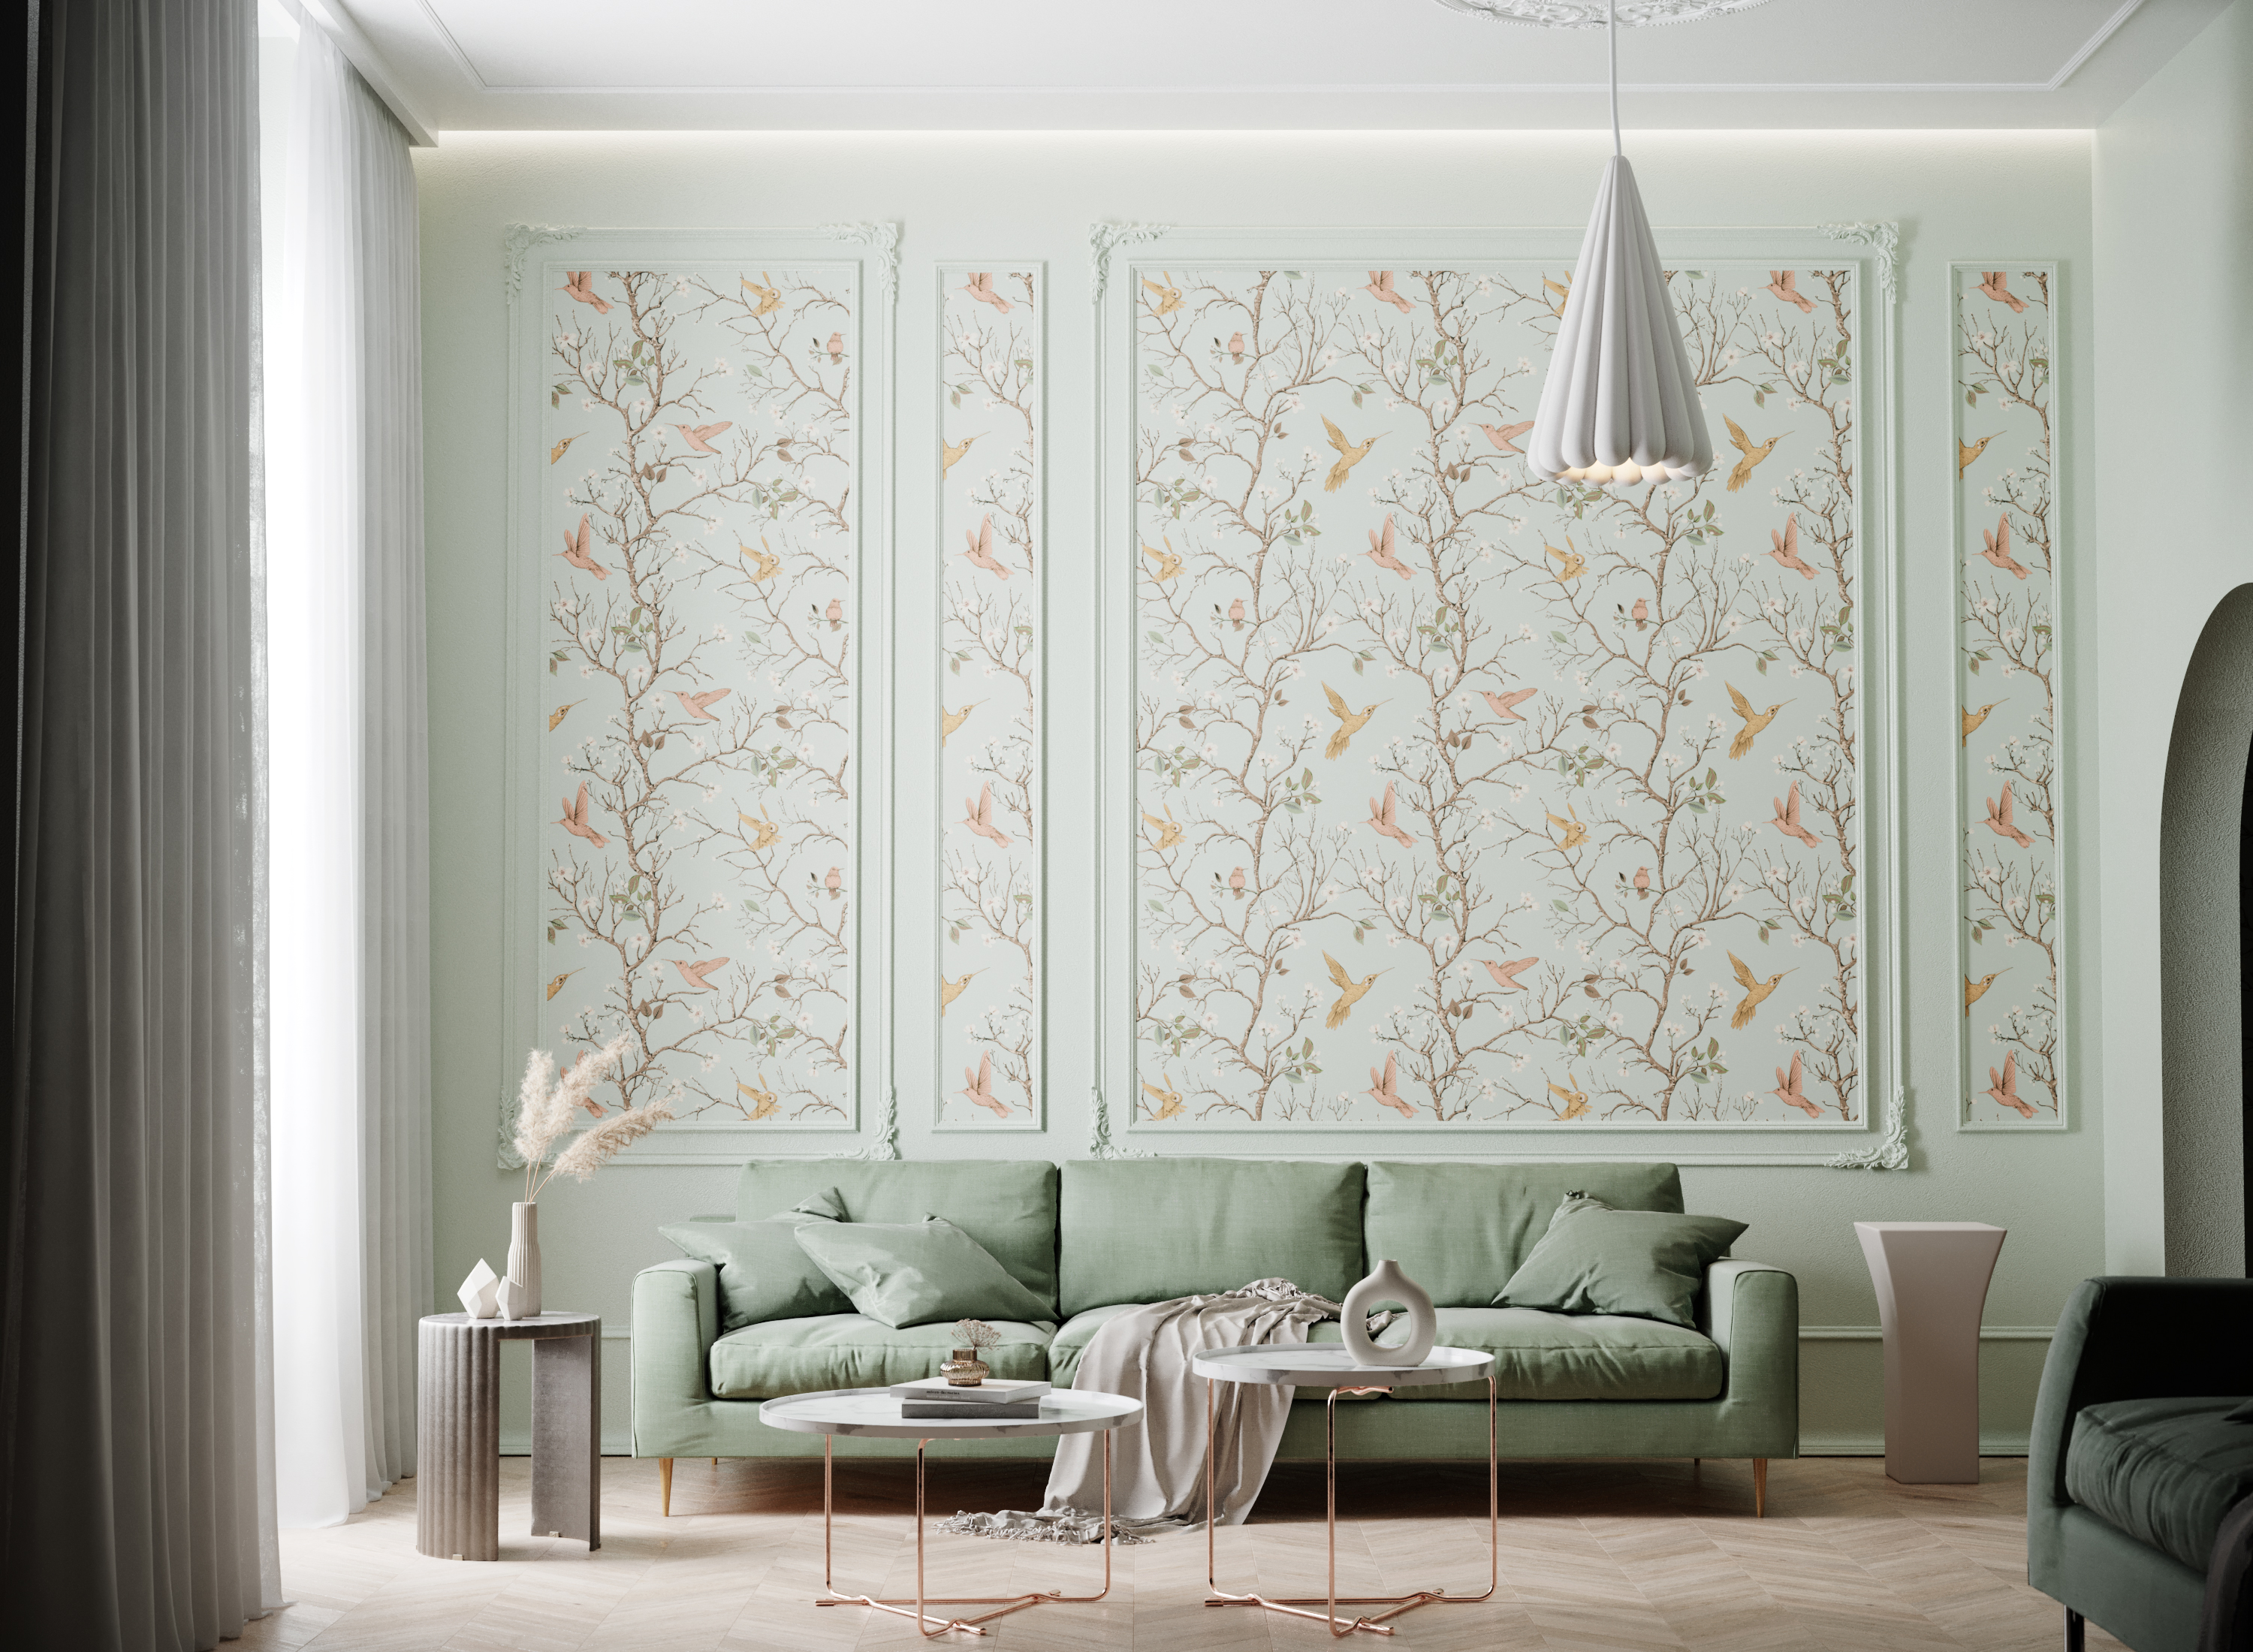 The 12 Best Places To Buy Temporary Wallpaper of 2023